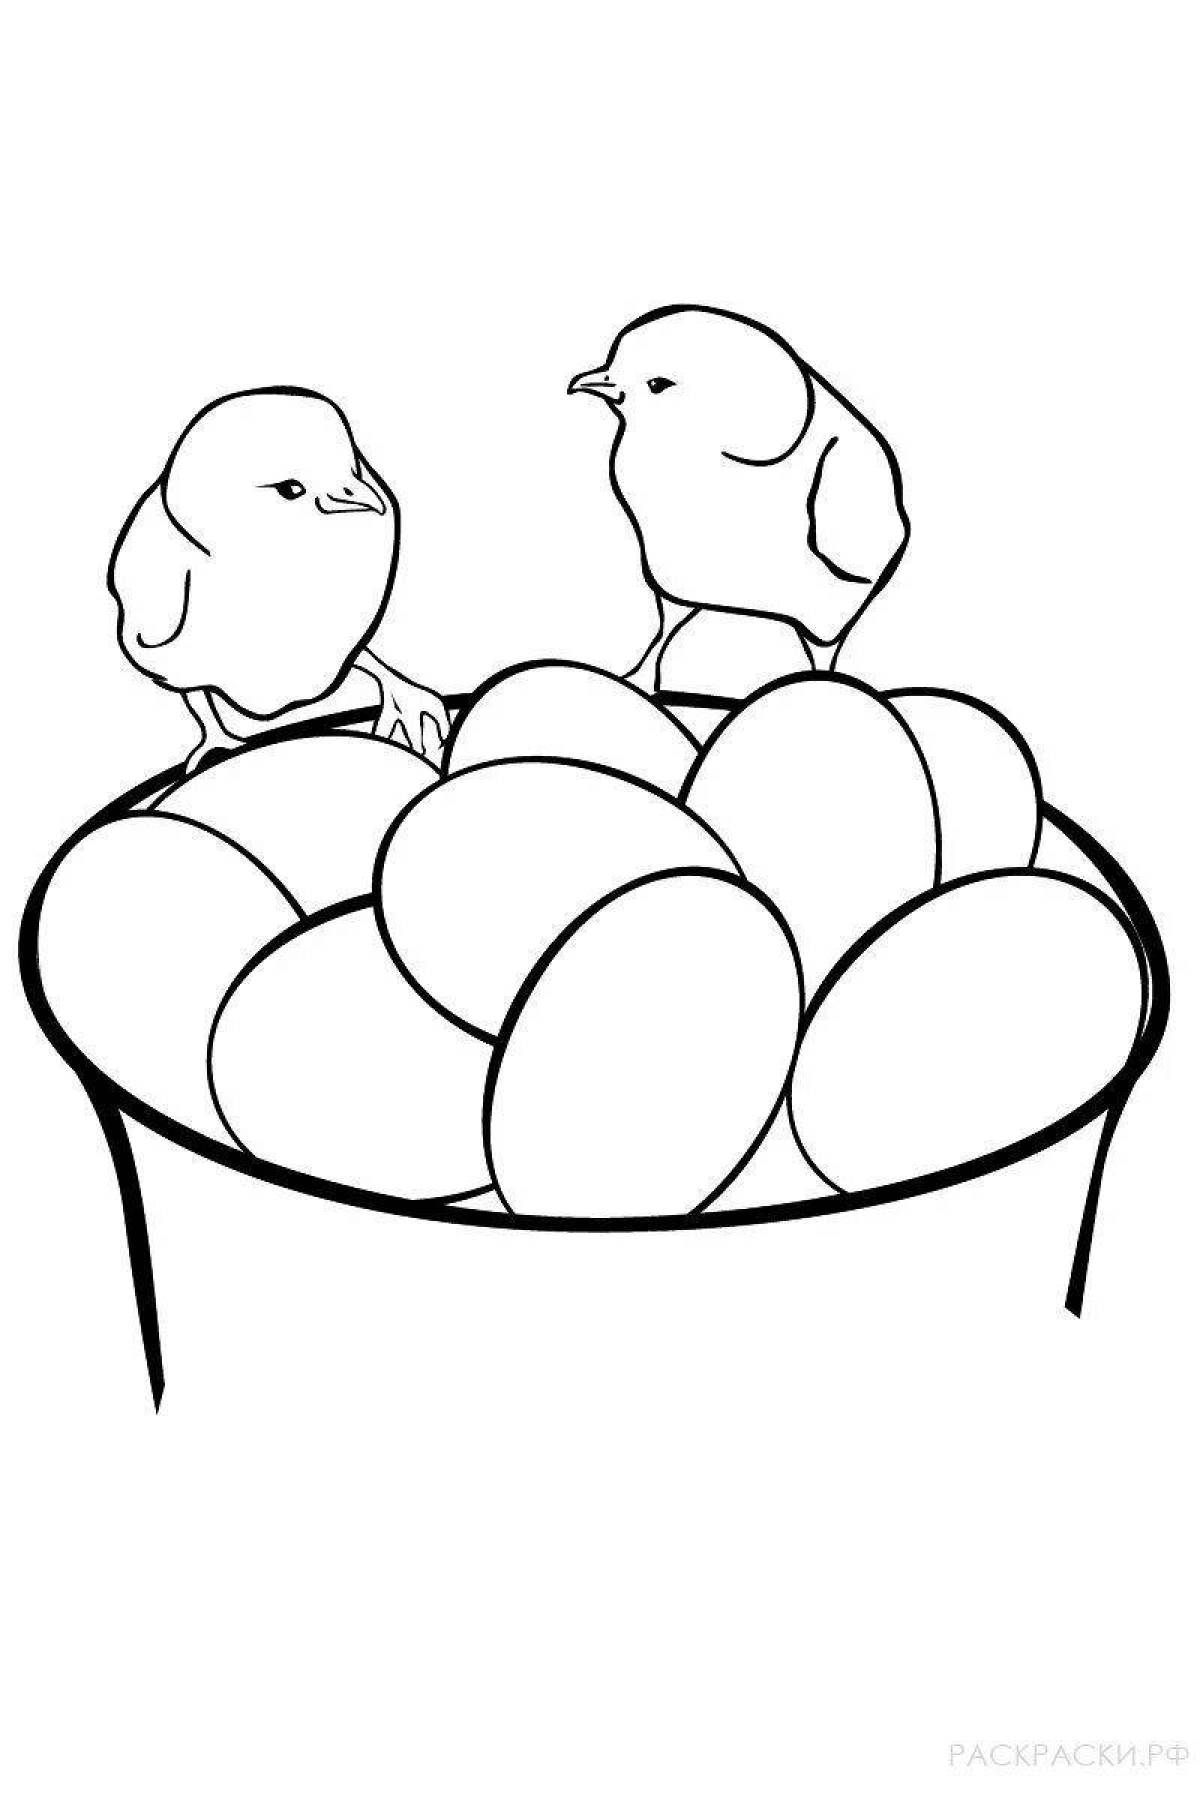 Playful chicken egg coloring page